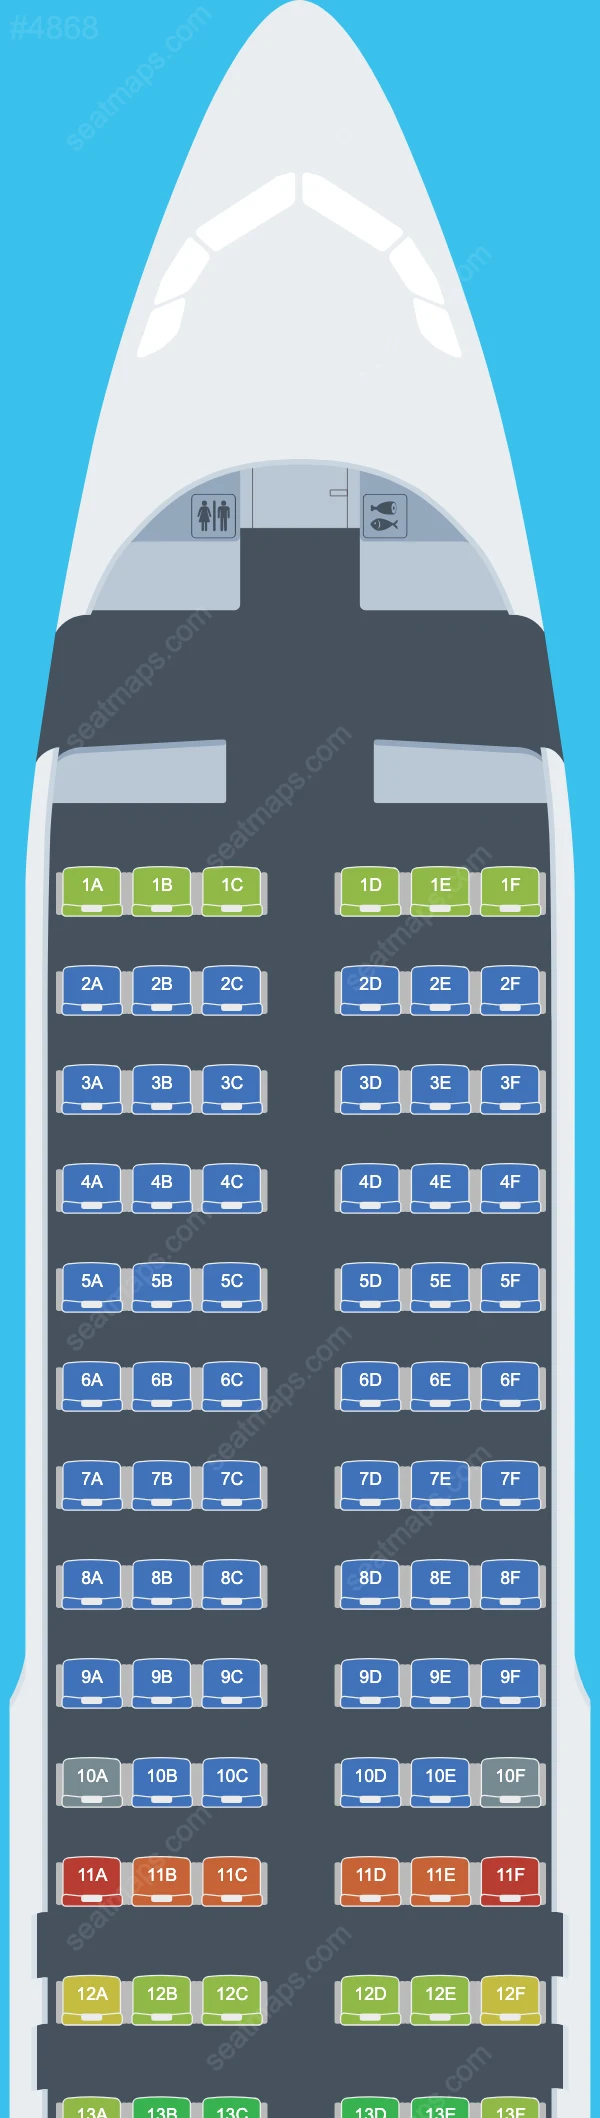 Sky Angkor Airlines Airbus A320 Seat Maps A320-200